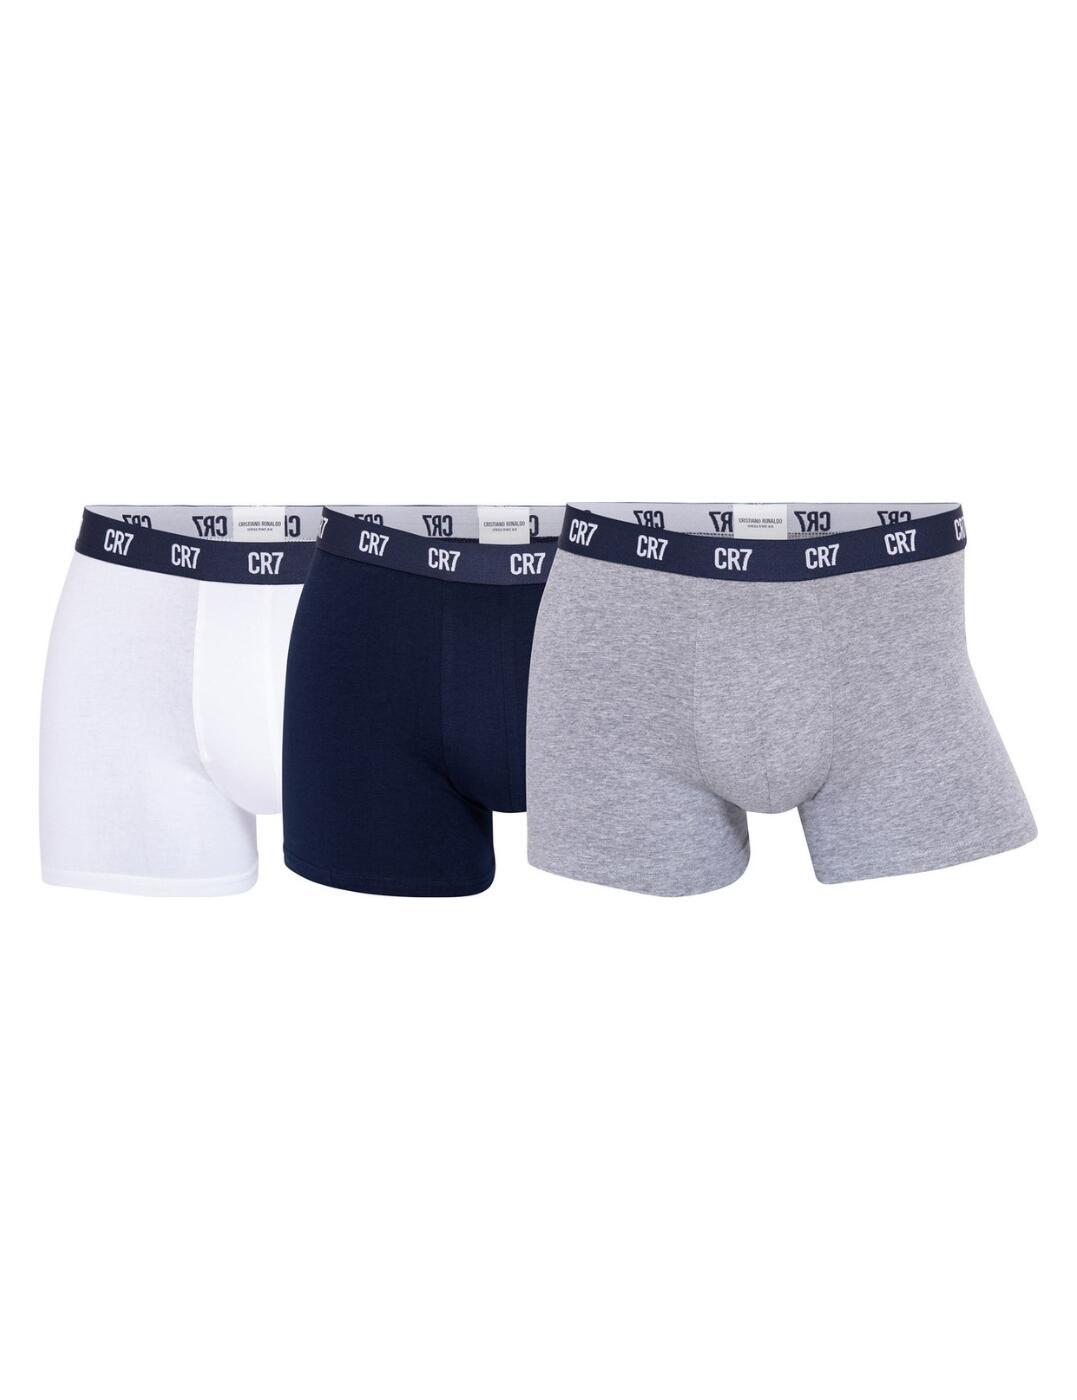 Buy CR7 Briefs 3 Pack from Next South Africa